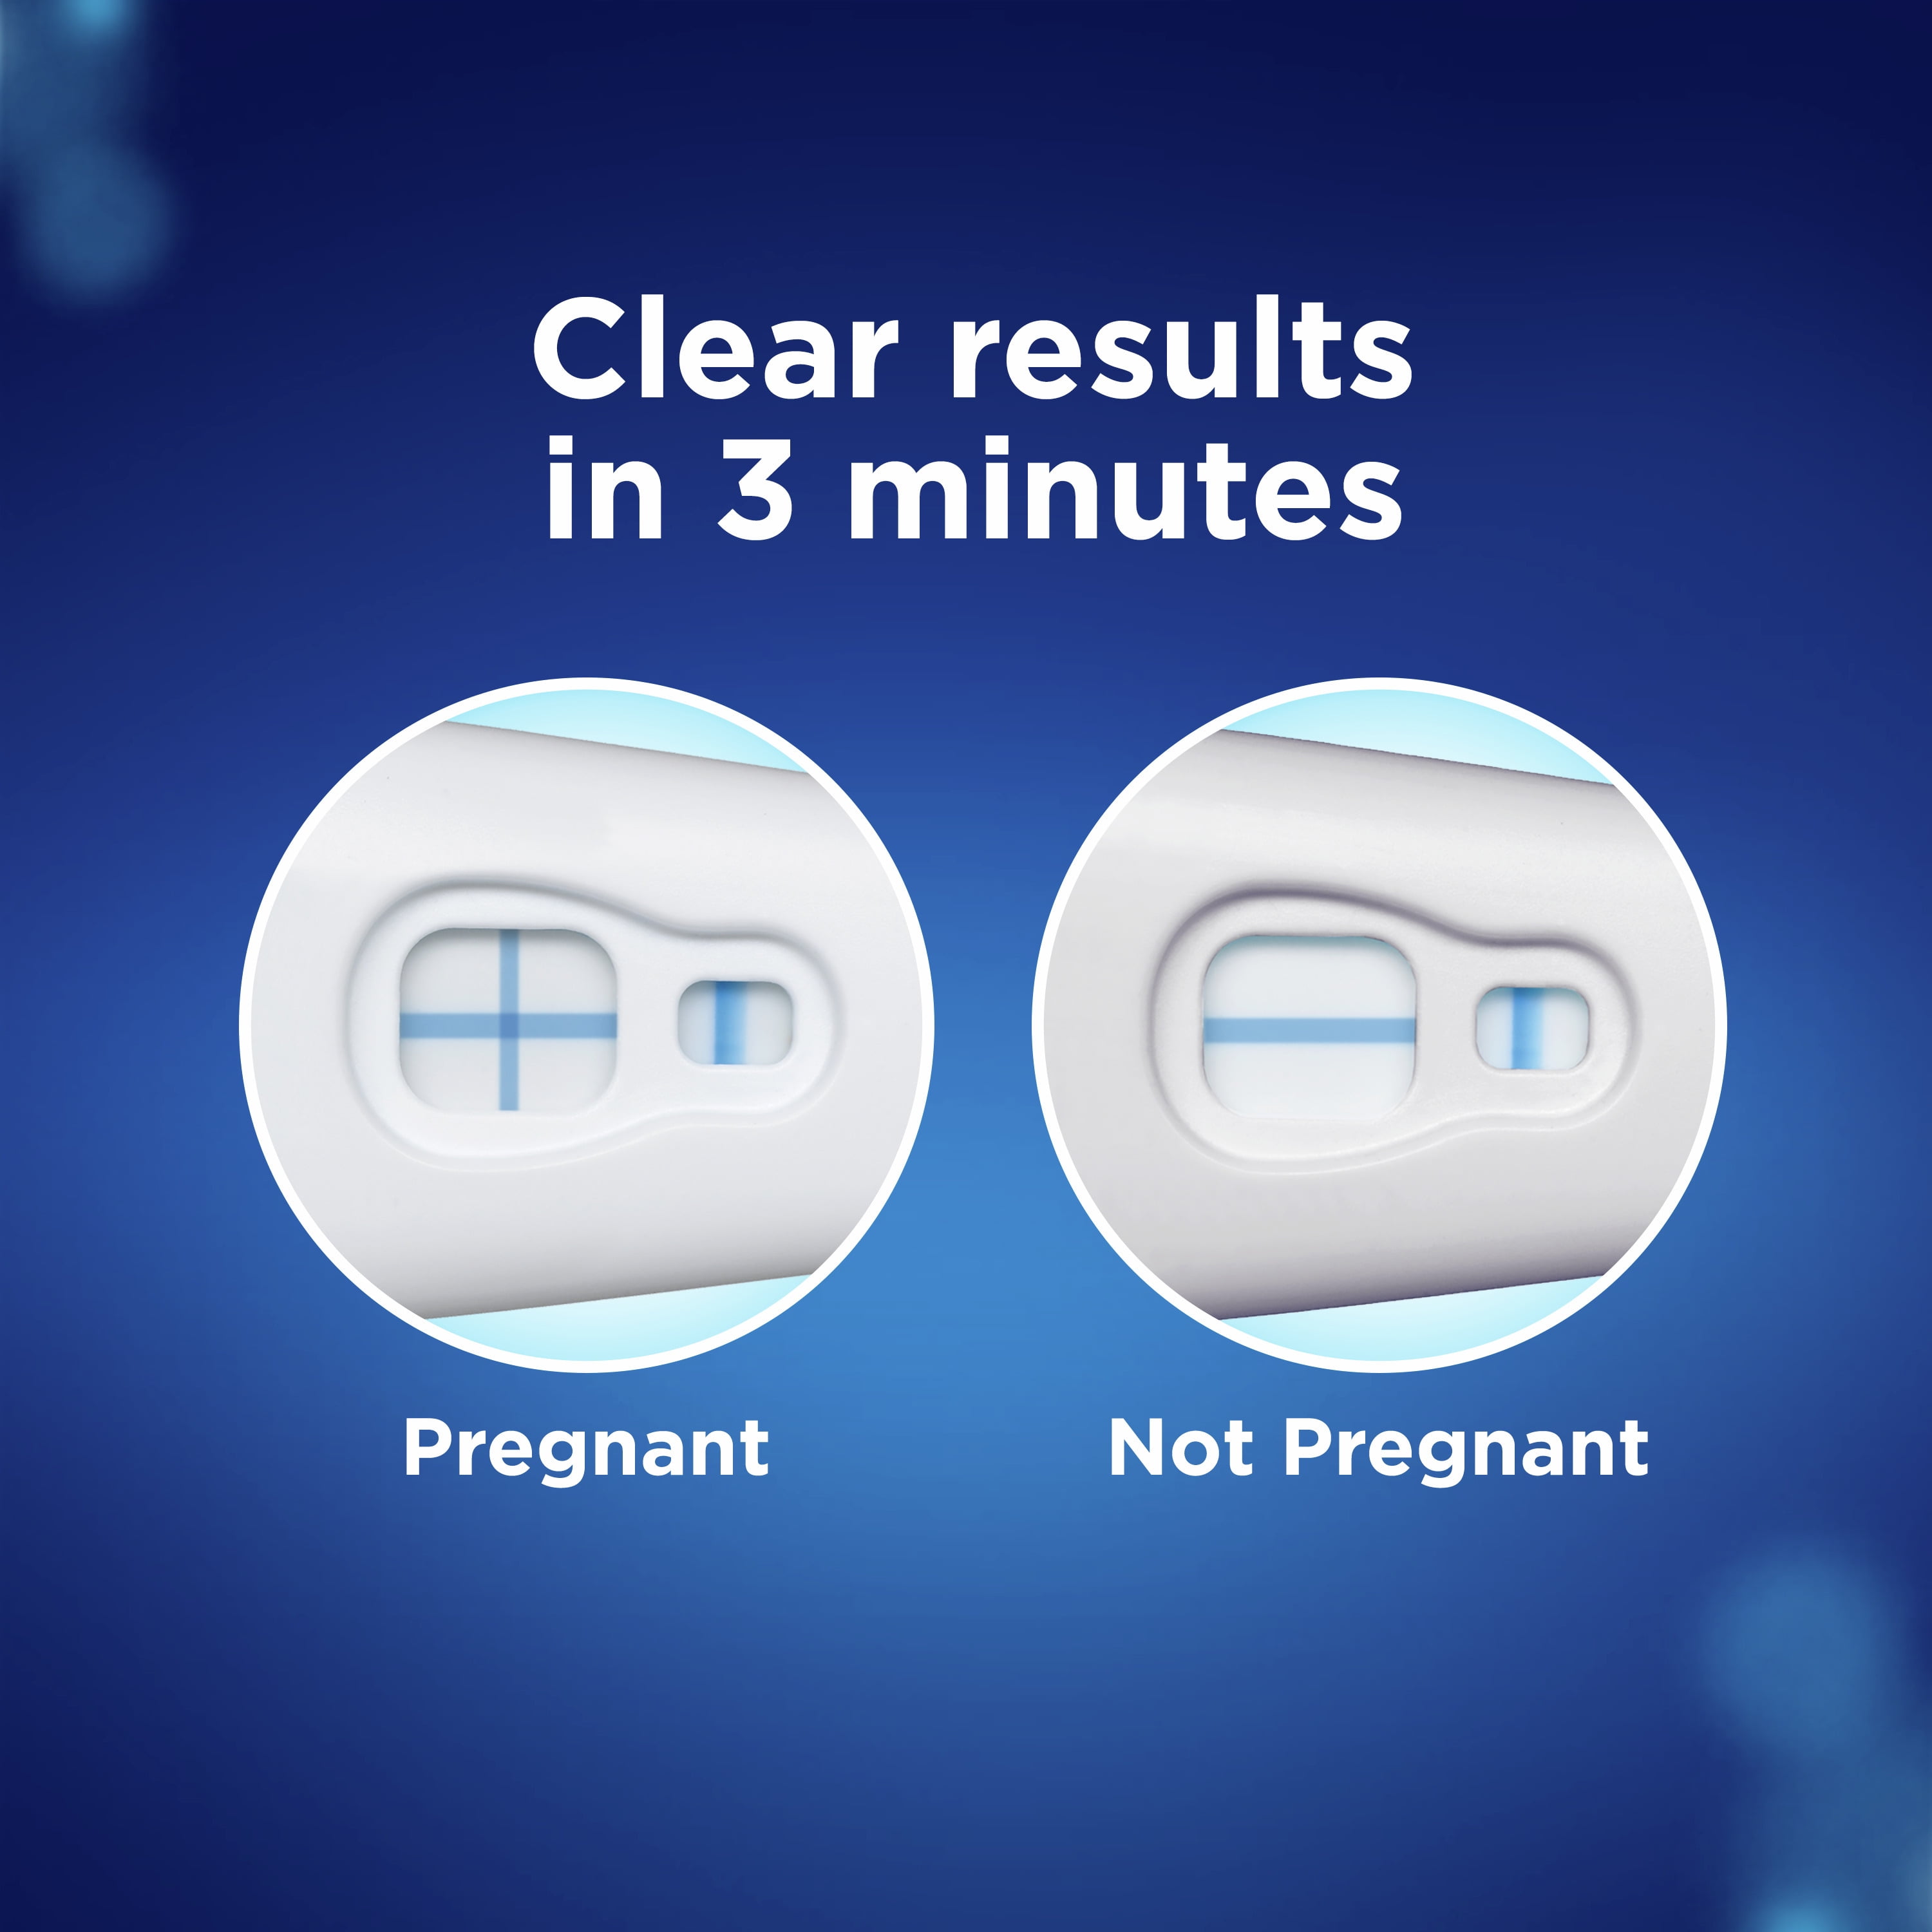 Clearblue Flip and Click Pregnancy Test, 2 Count 